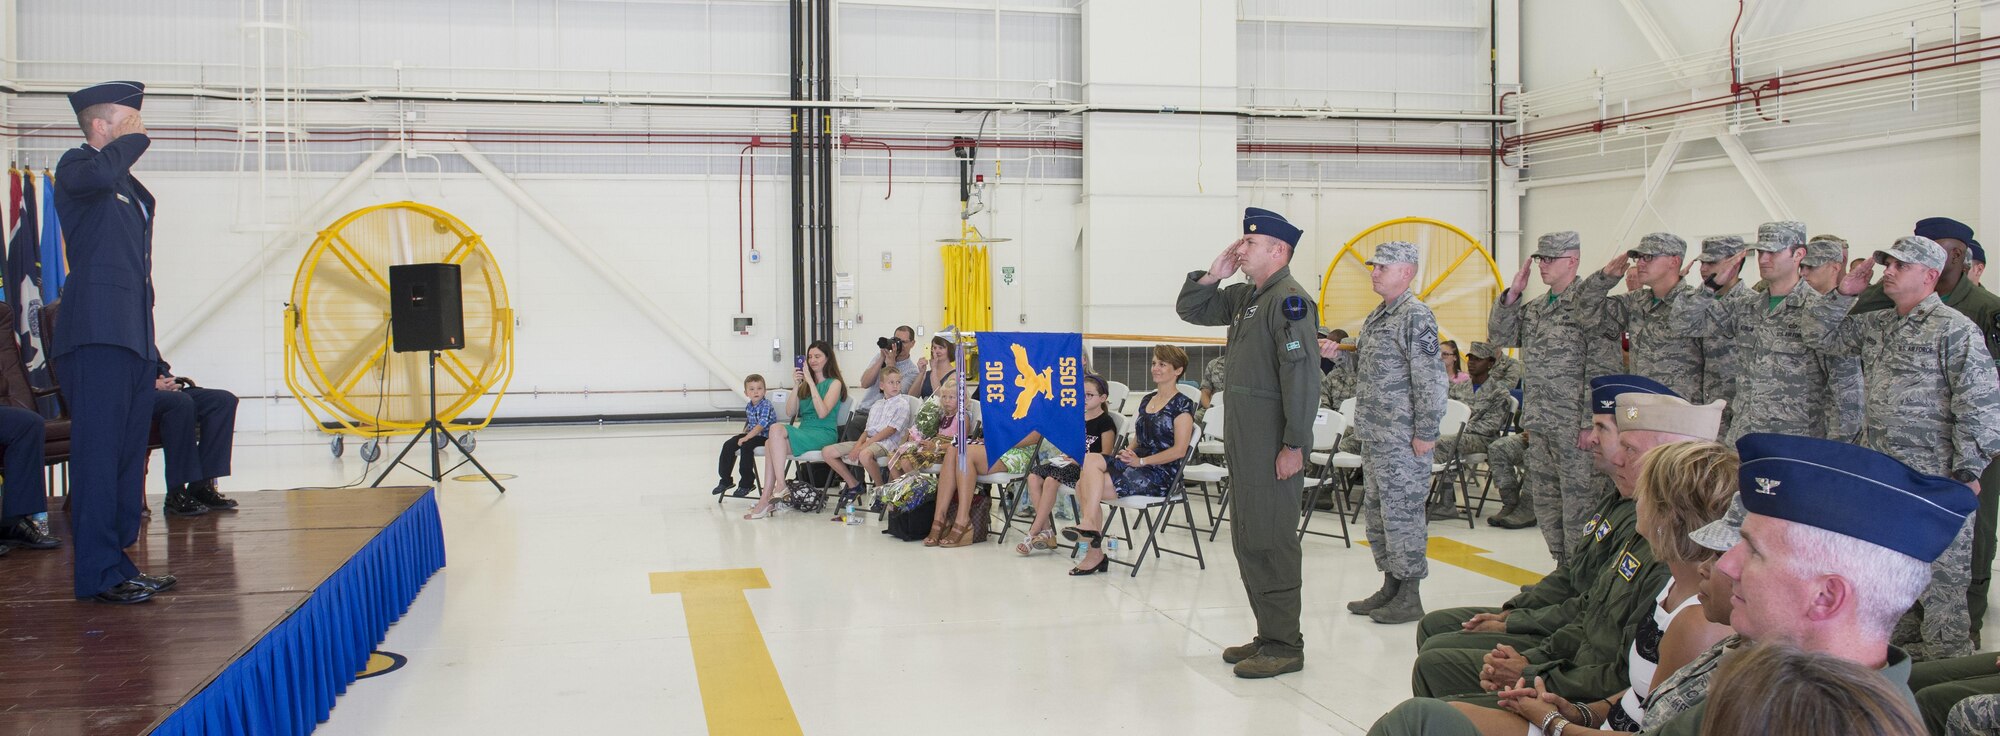 Lt. Col. Scott Gunn, 33rd Operations Support Squadron commander, renders his first salute to the Airmen of the 33rd OSS during the 33rd OSS change of command ceremony June 24, 2016, at Eglin Air Force Base, Fla. The 33rd OSS oversees F-35 weapons and tactics training and aircrew flight equipment training at Eglin AFB as well as the training syllabus and operational intelligence training for both AFSOC and the F-35 program at Eglin AFB. (U.S. Air Force photo by Senior Airman Stormy Archer/Released)